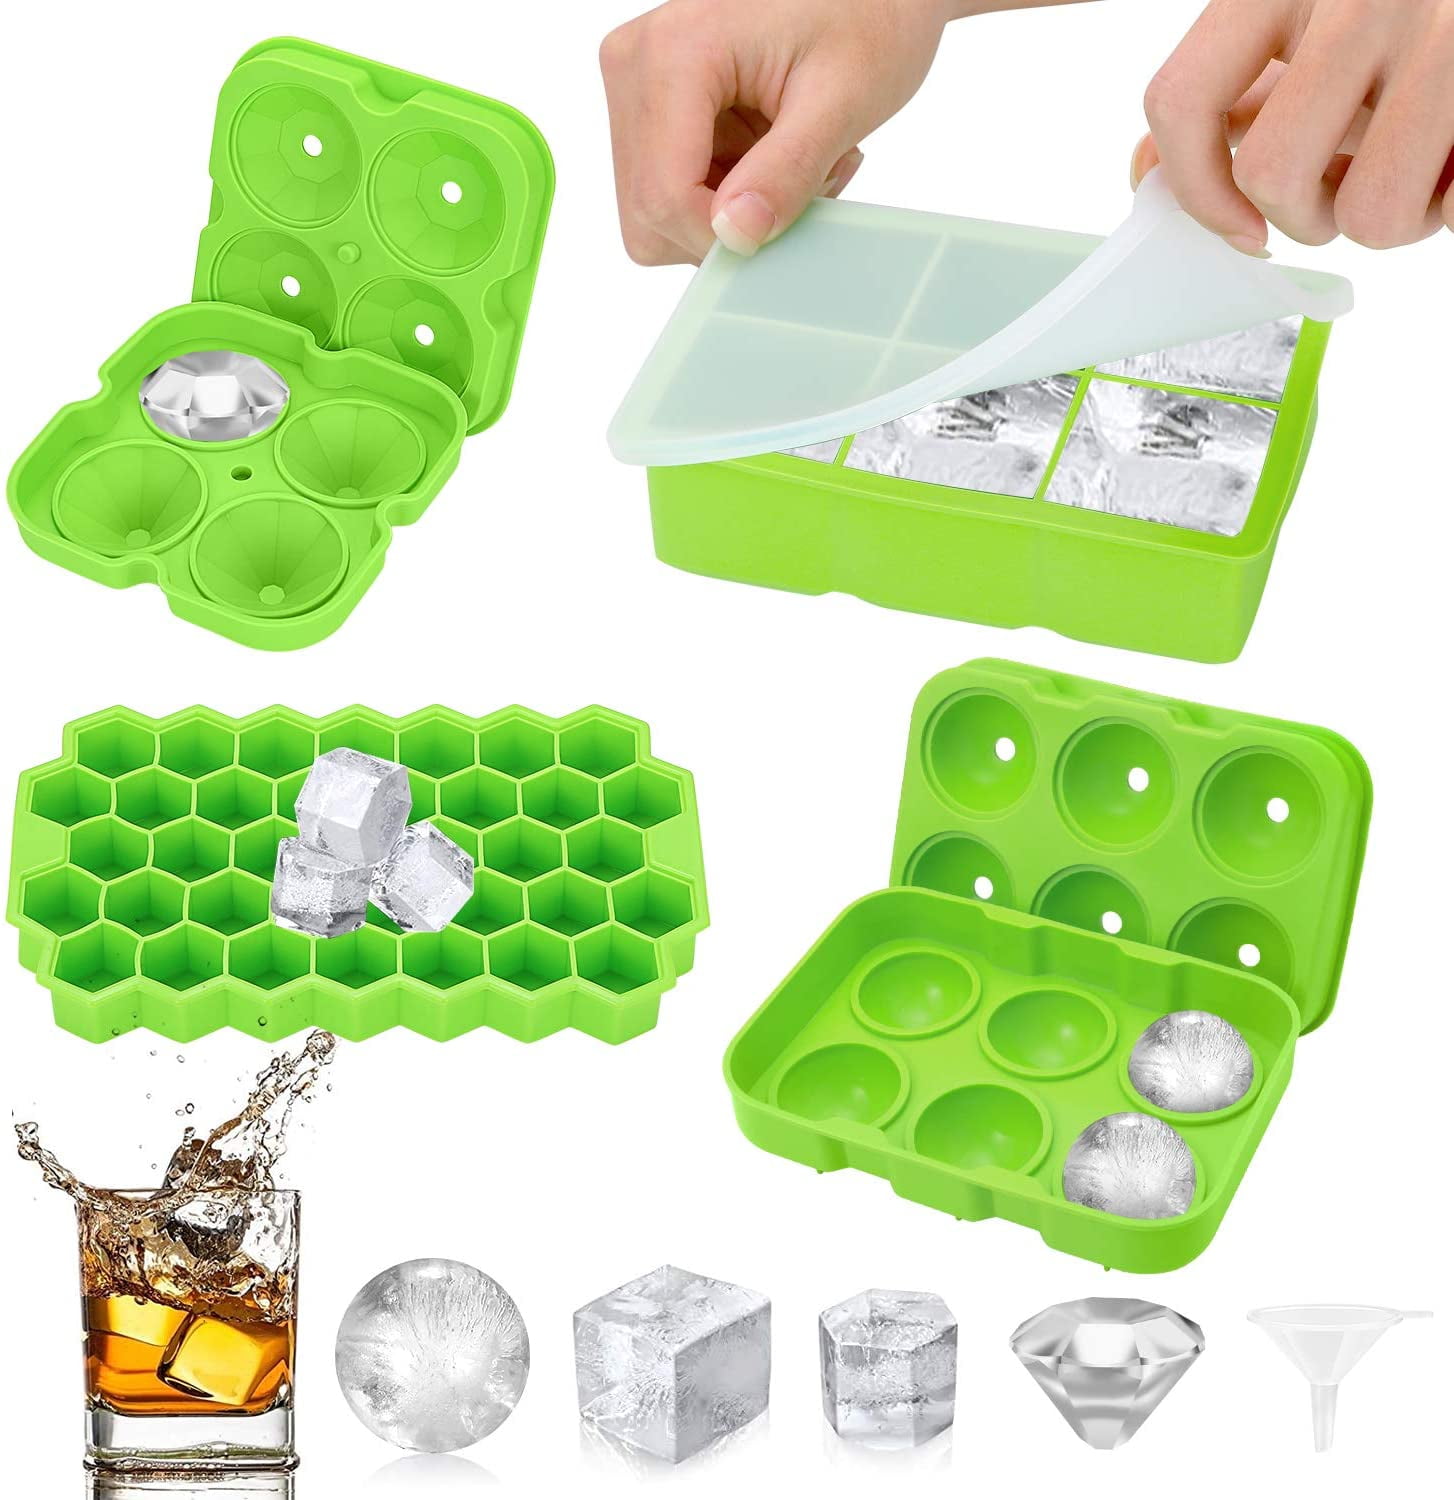 NEW Diamond Ice Cube 4-Ice Trays Molds Reusable Silicone Flexible Maker With Lid